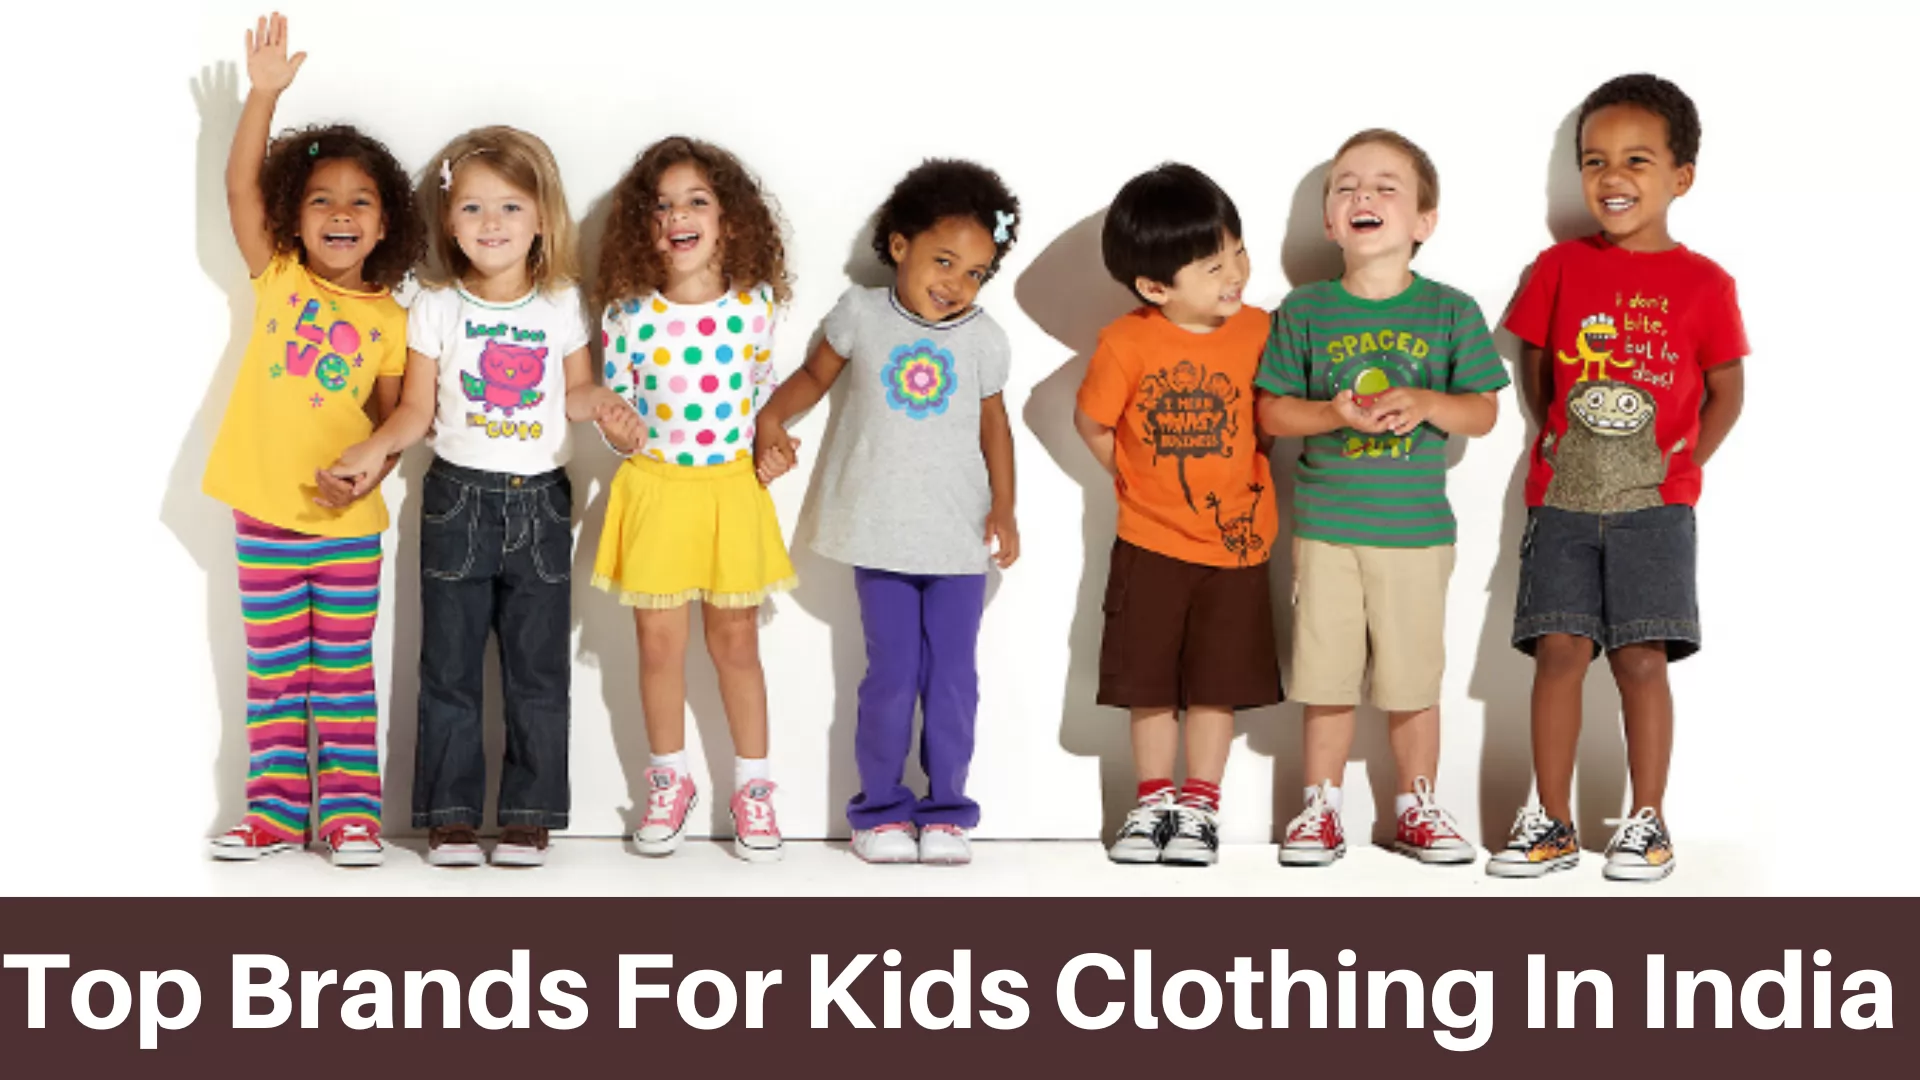 23 Top Brands for Kids Clothing in India 2022